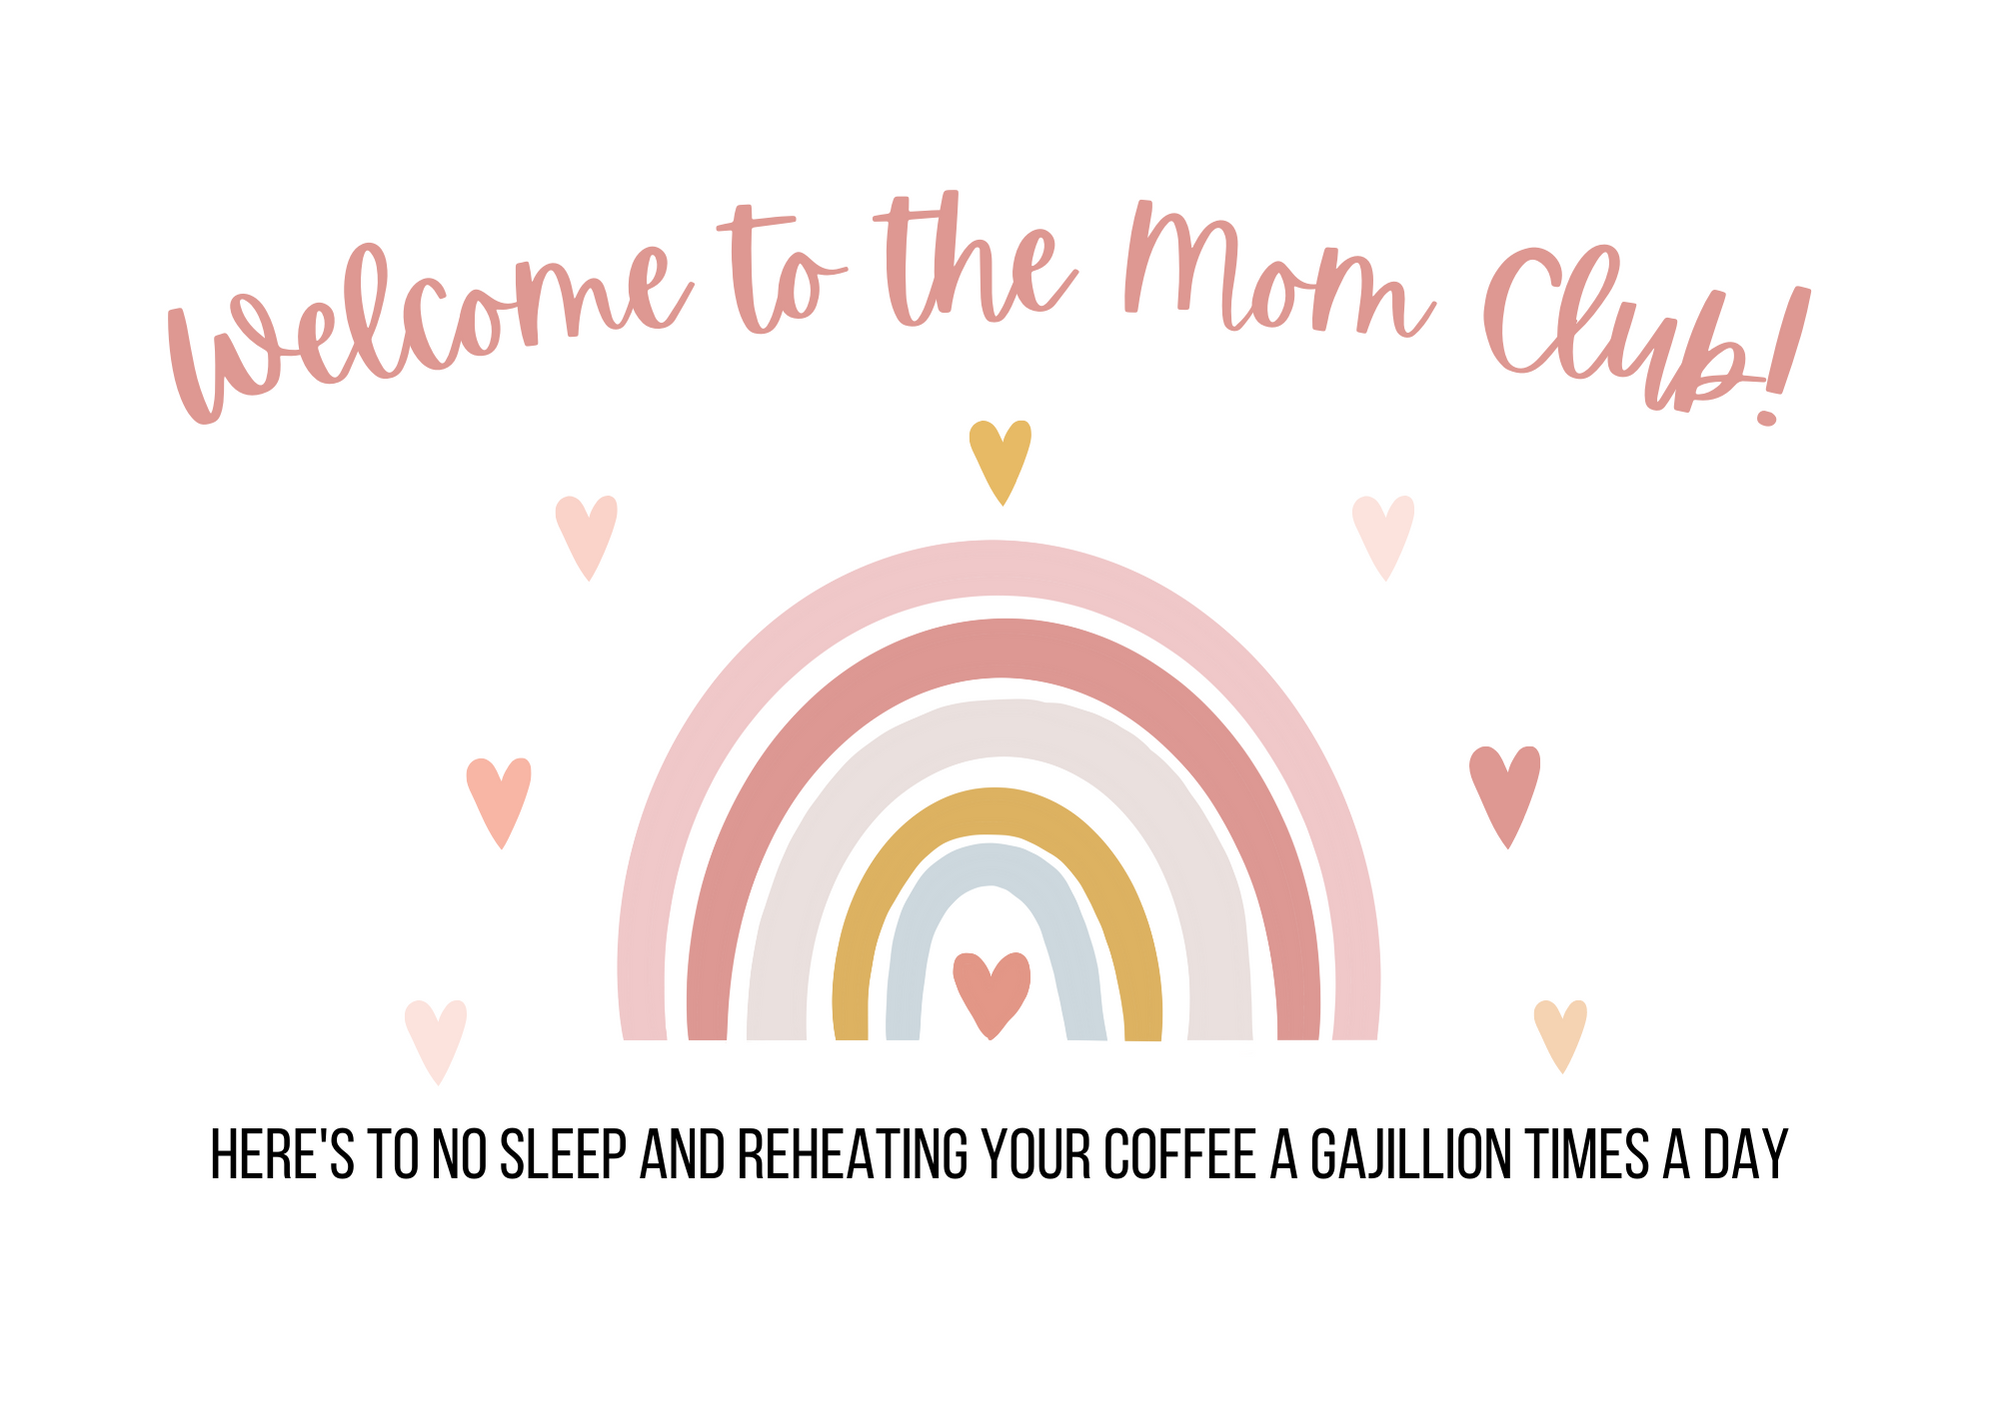 White seed paper greeting card saying "Welcome to the mom club! Here's to no sleep and reheating your coffee a gajillion times a day" with pastel pink rainbow